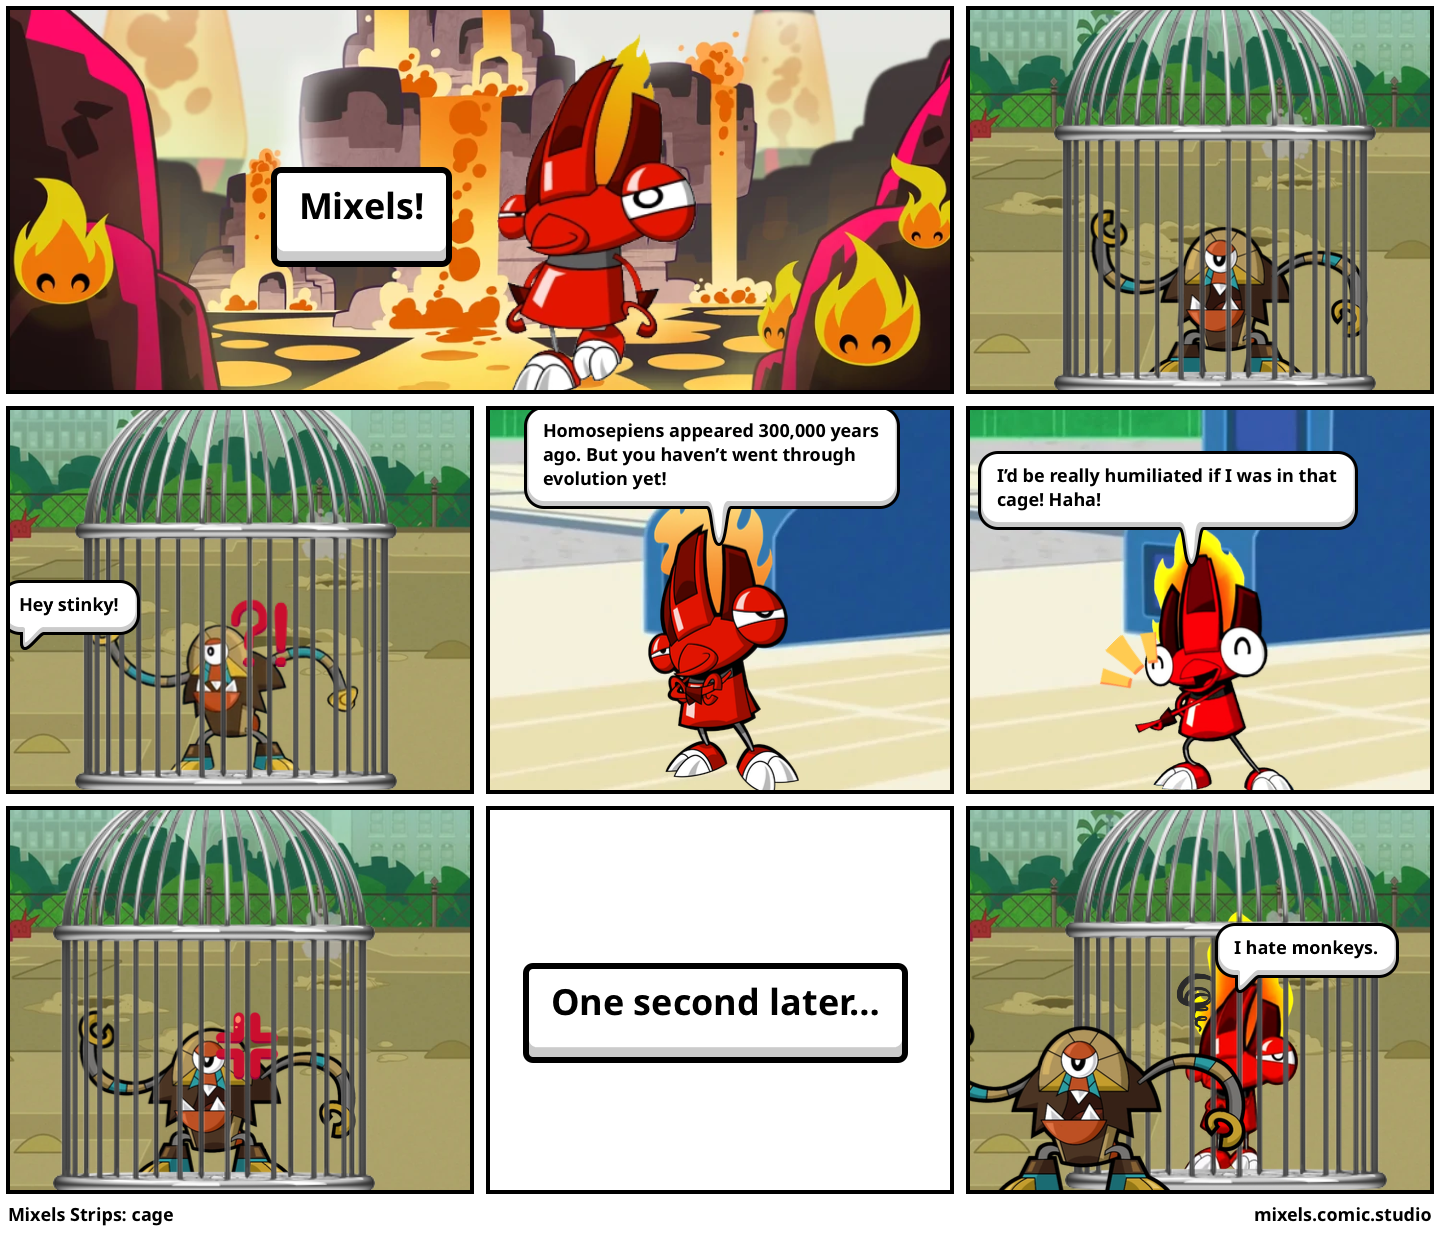 Mixels Strips: cage